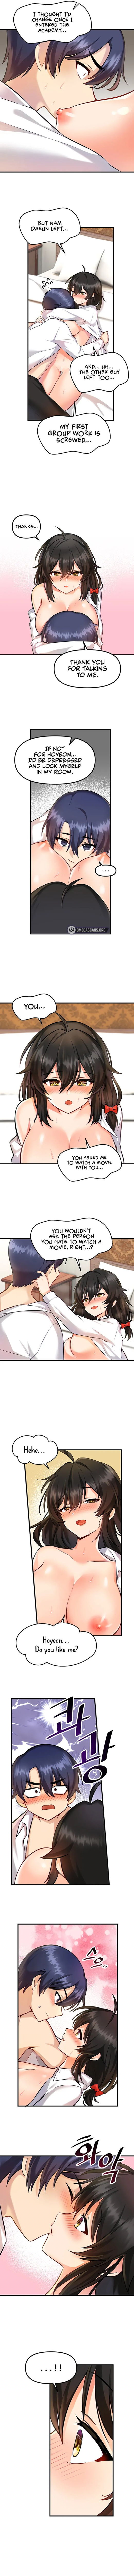 trapped-in-the-academys-eroge-chap-4-2